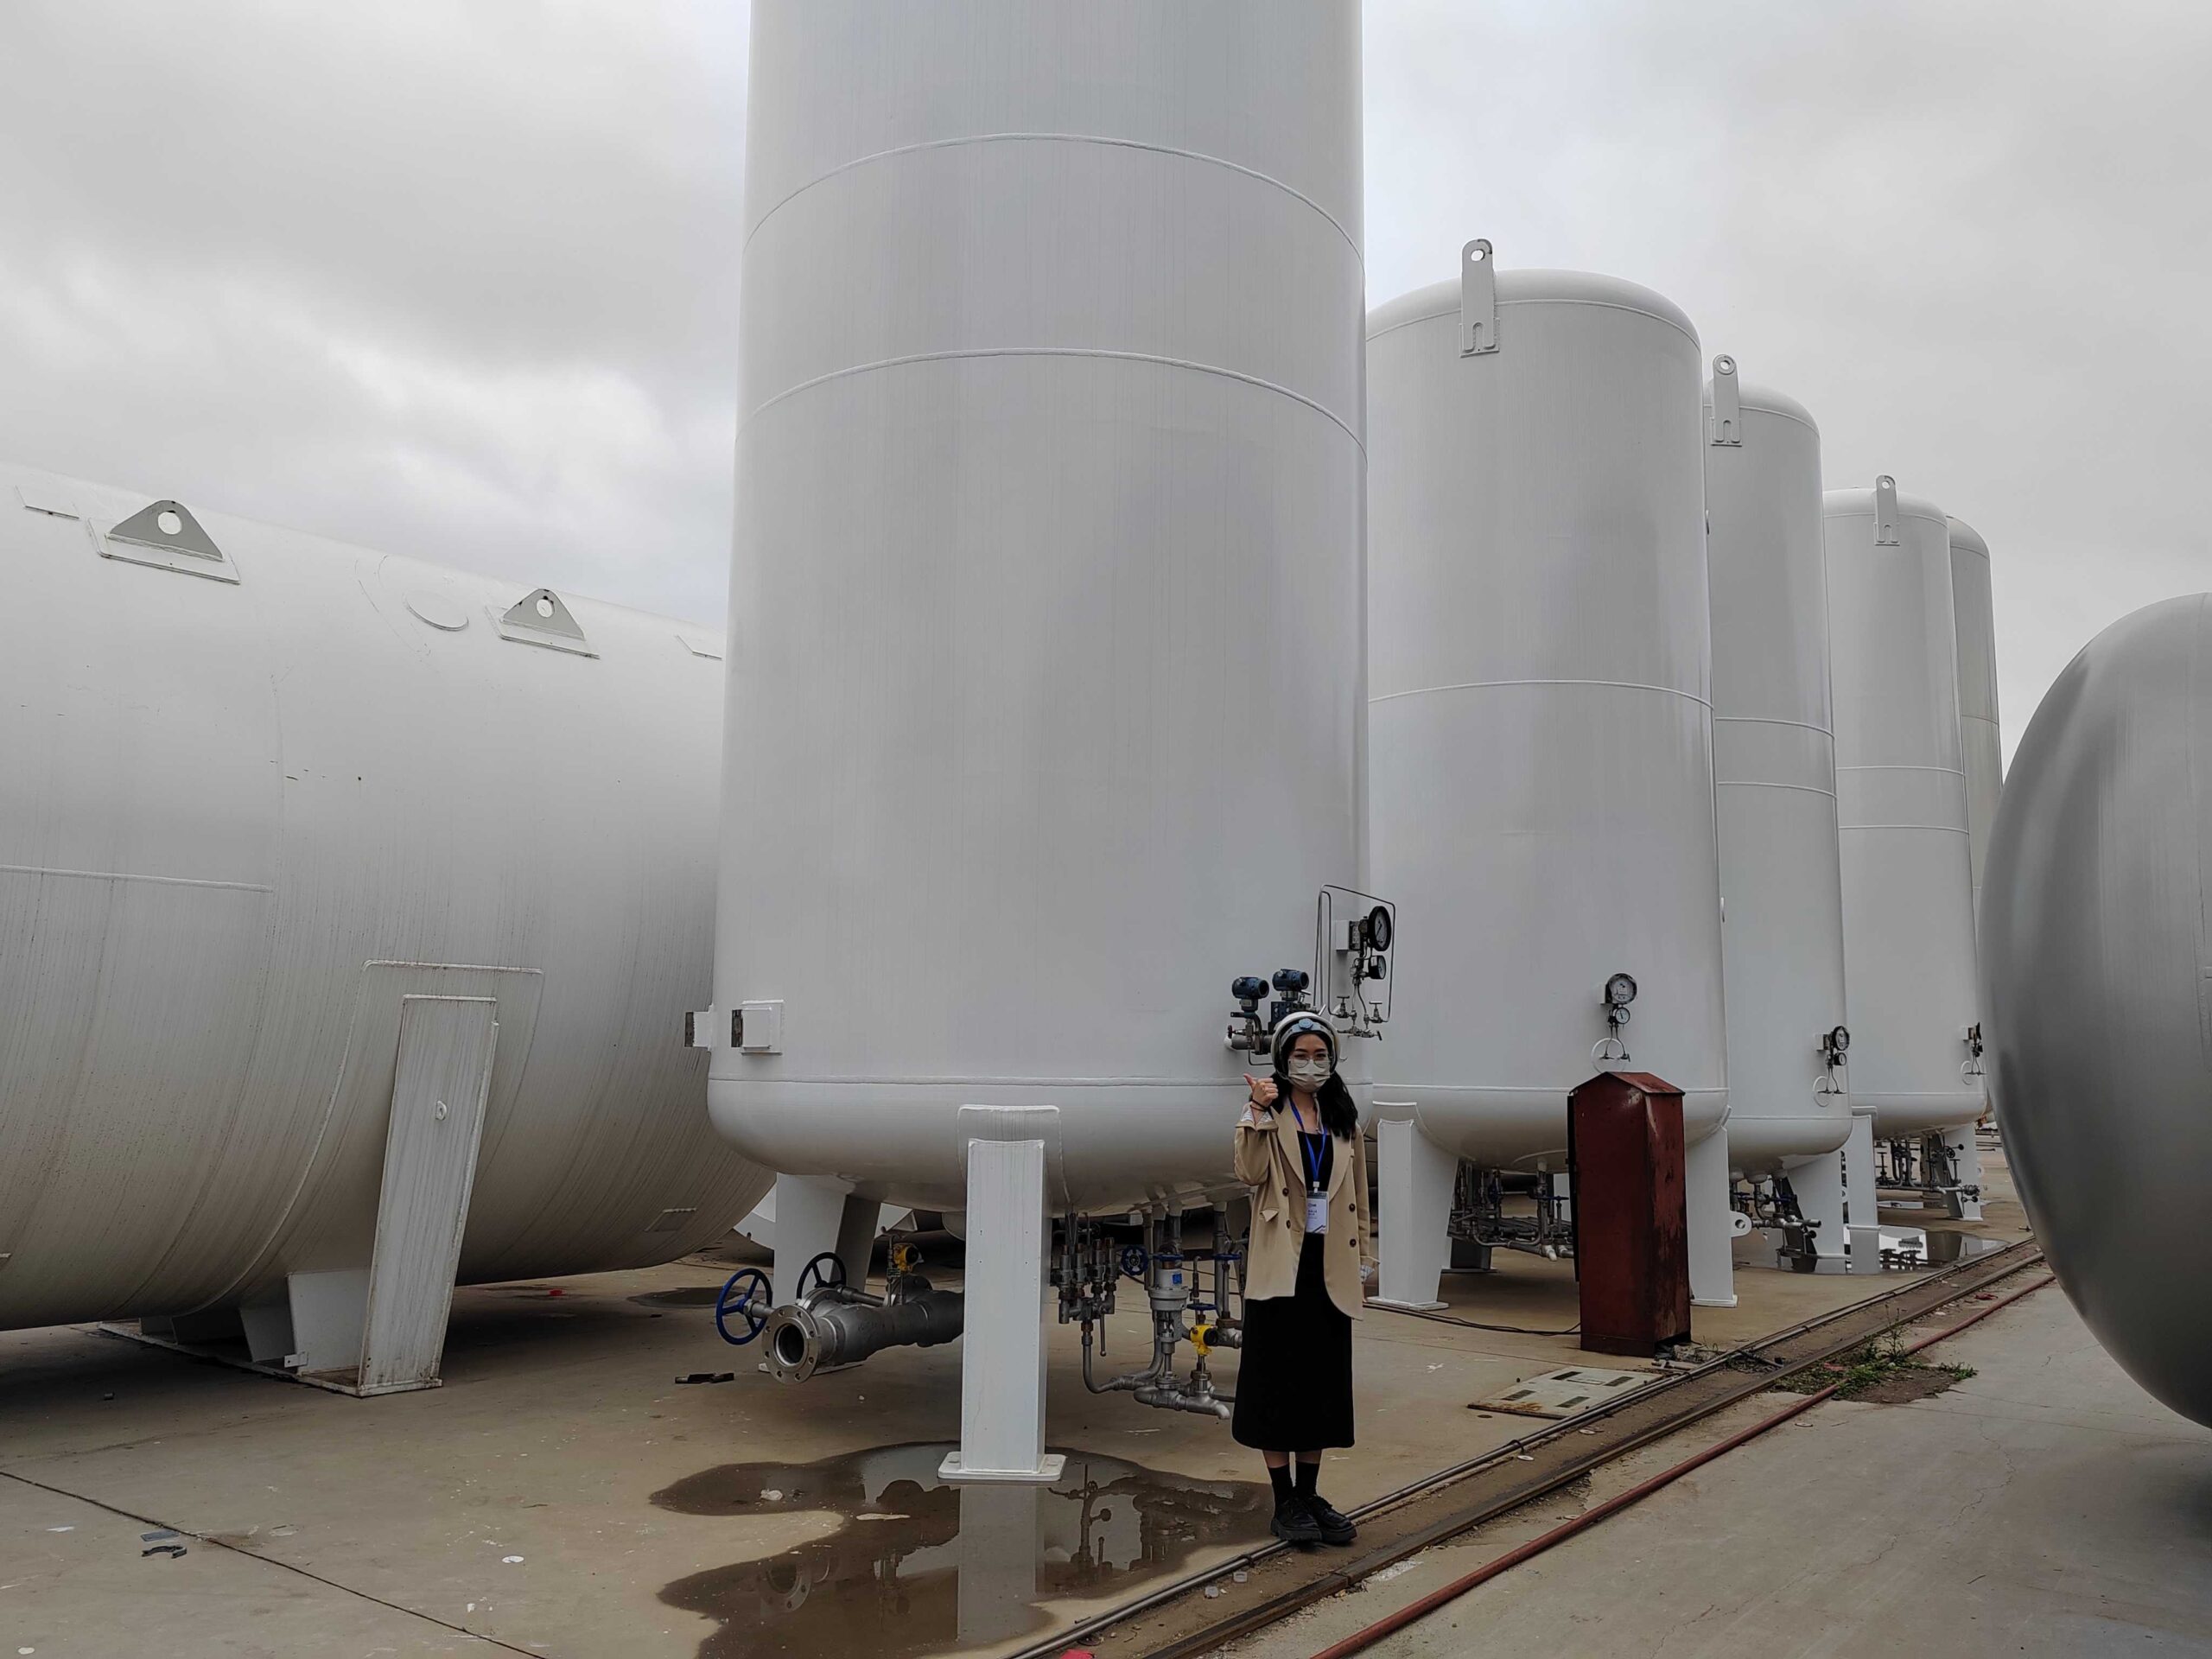 Cryogenic tanks are important in many applications